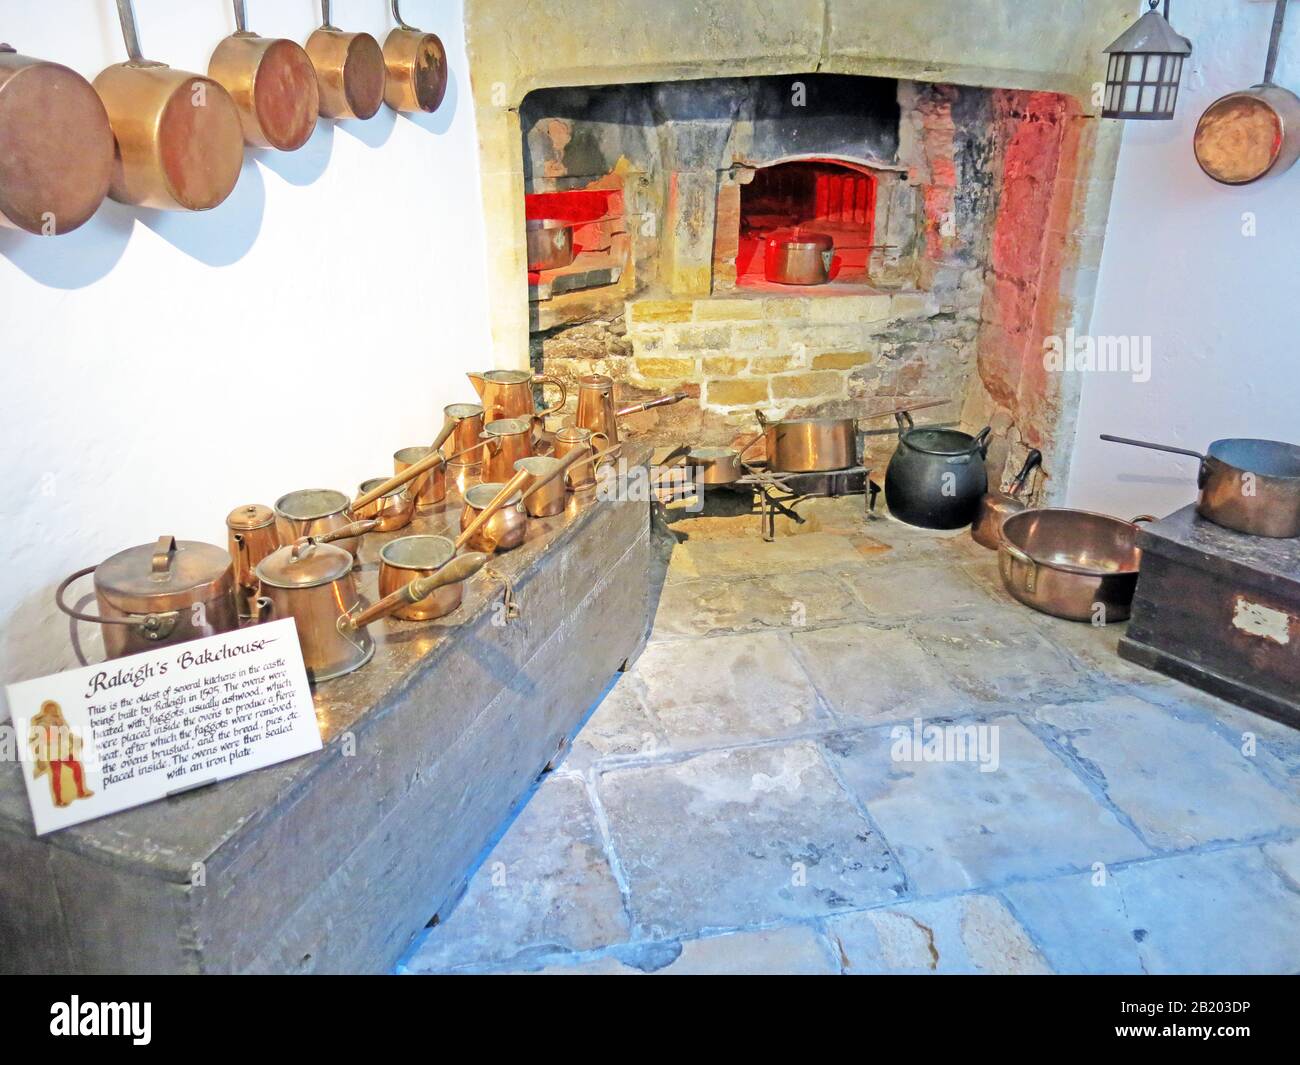 Raleigh's Bakehouse in the cellars of Sherborne 'New' Castle complete with copper pots and pans, Sherborne, Dorset, England, UK Stock Photo